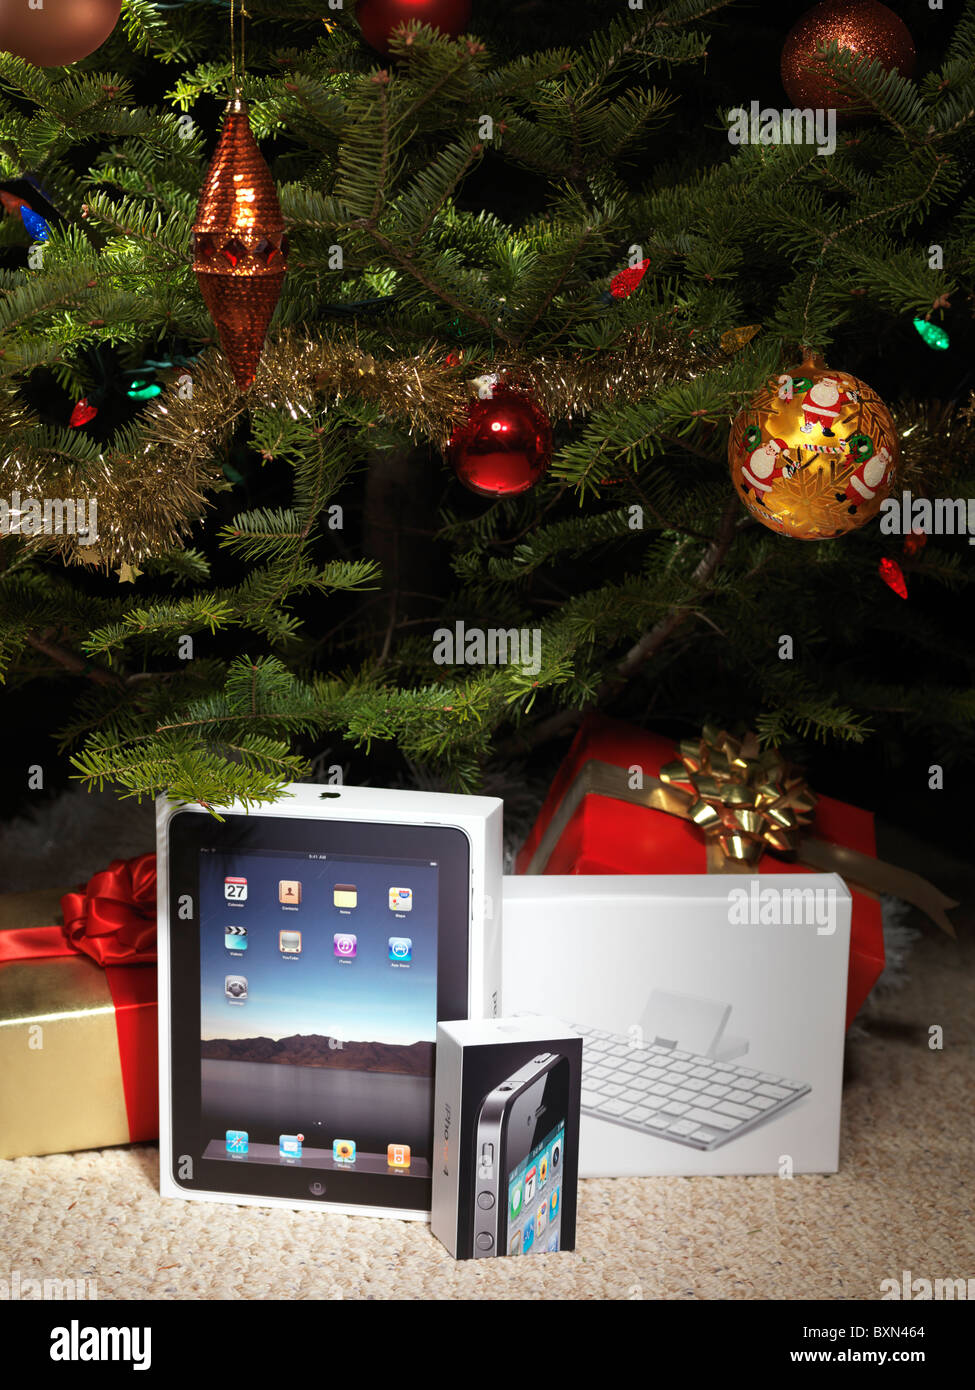 Apple iPad and iPhone 4 amongst presents under a Christmas tree Stock Photo